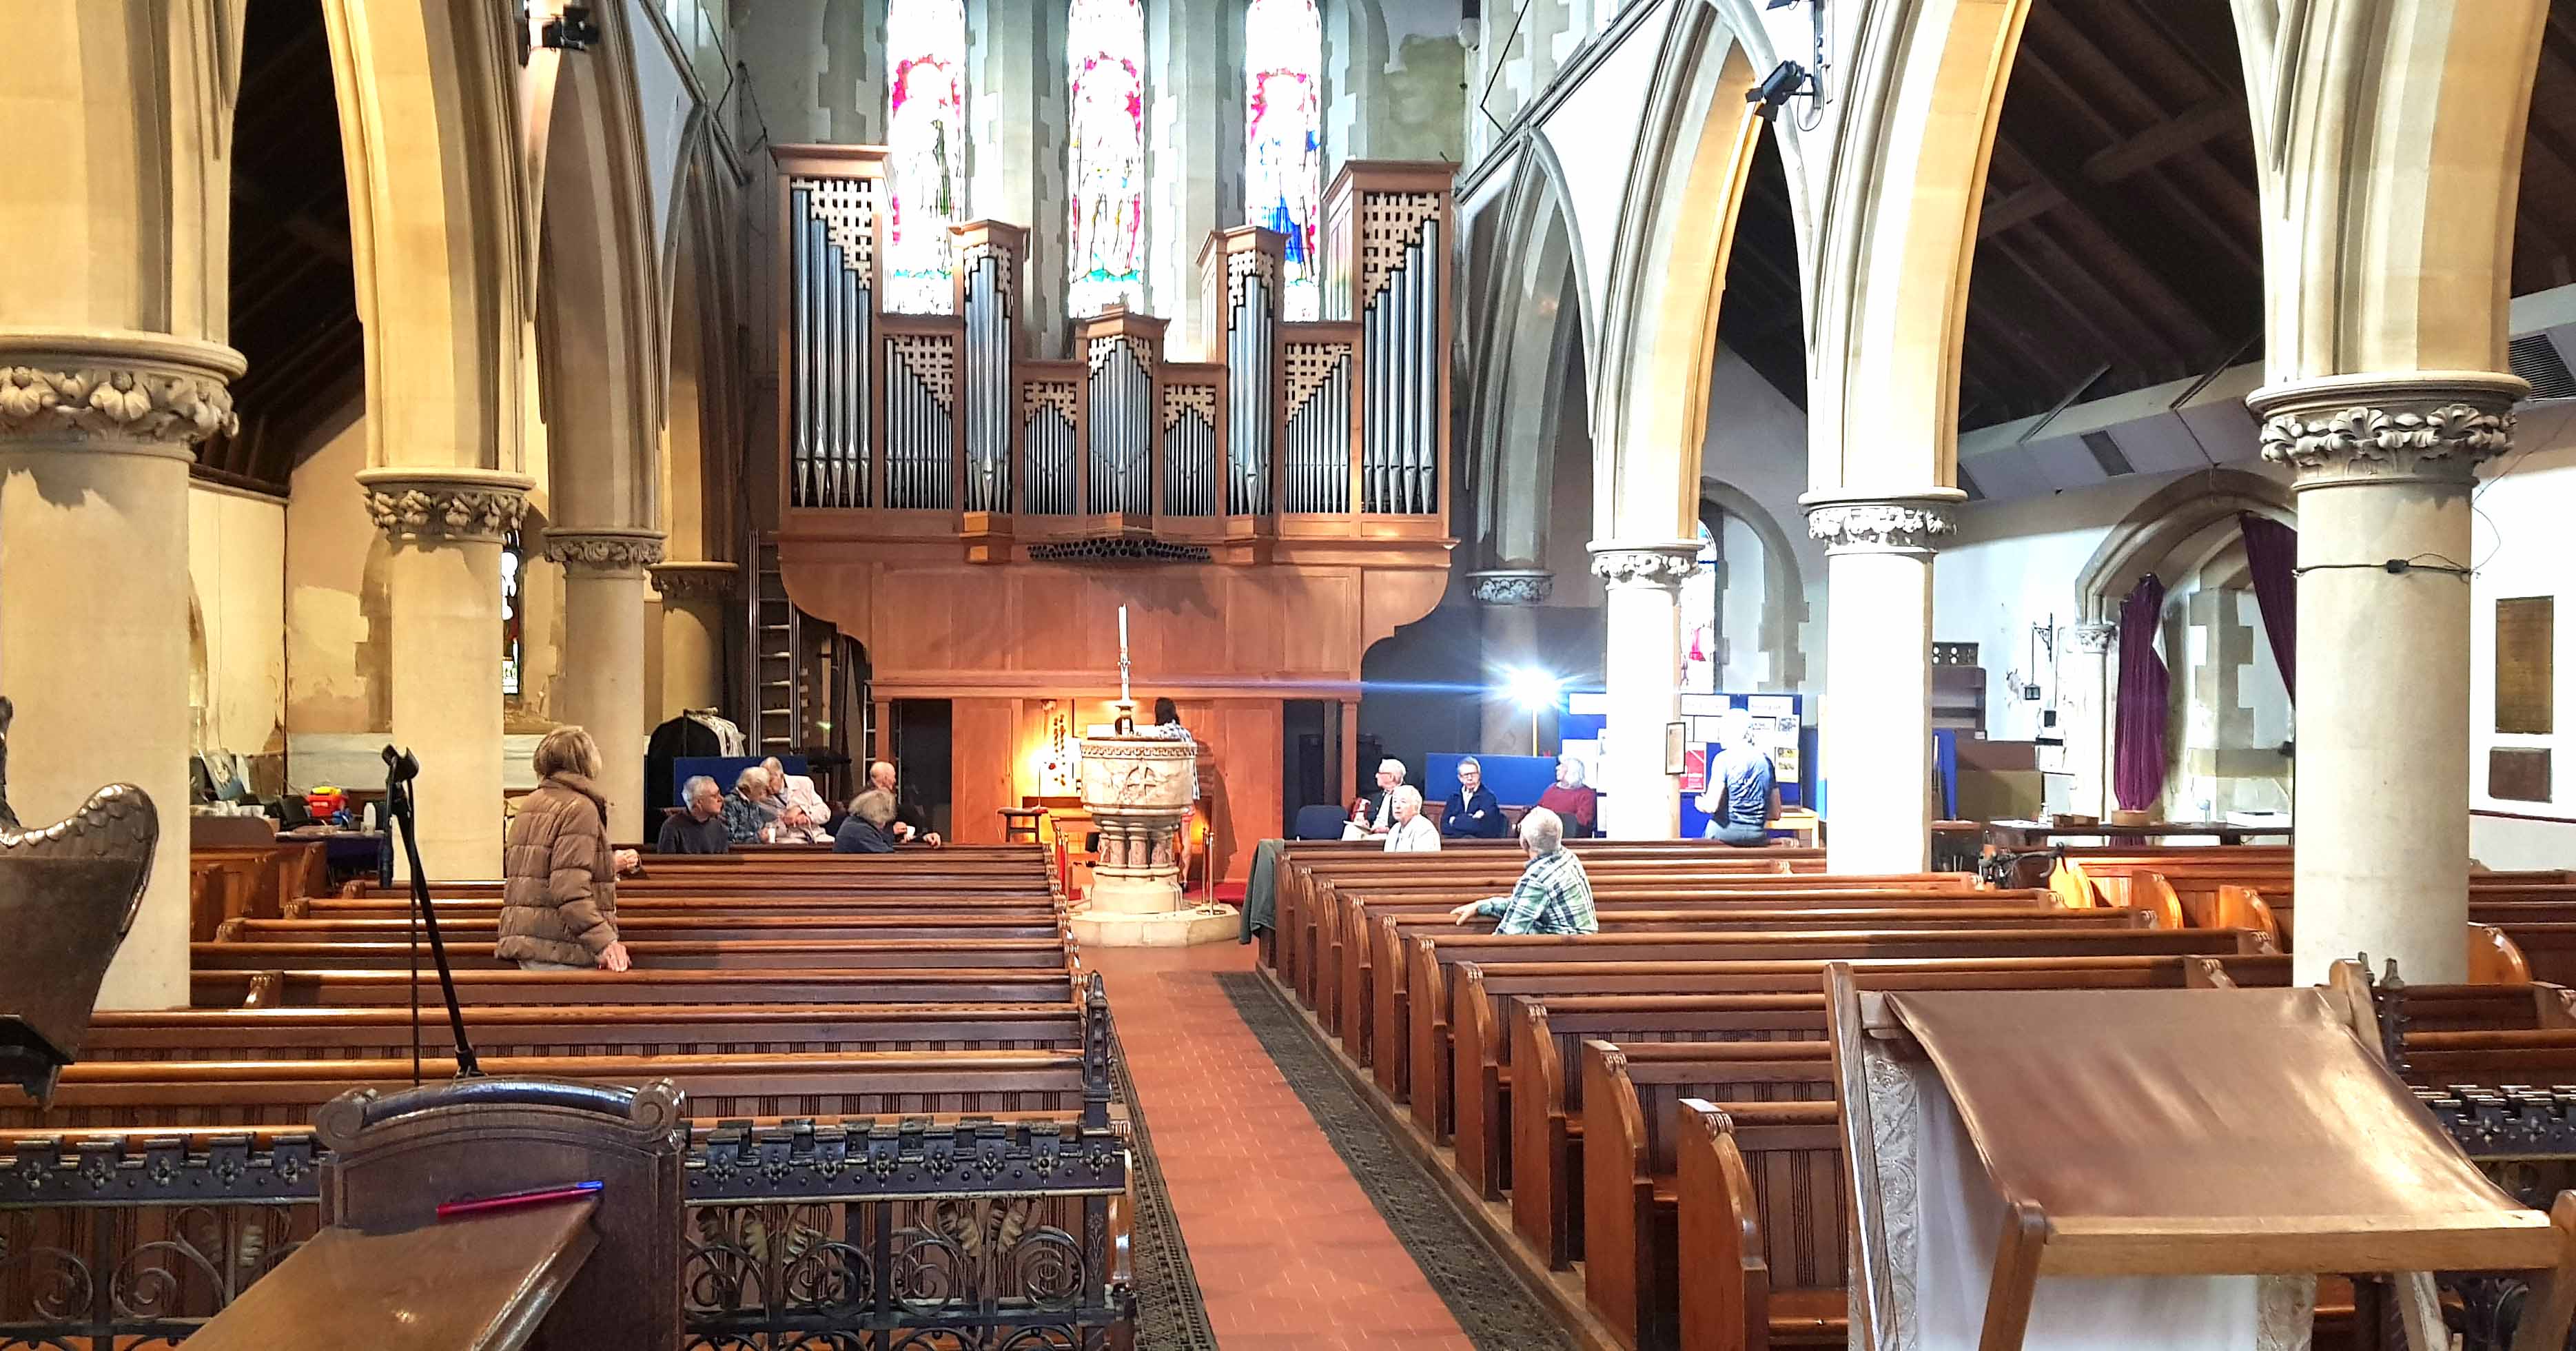 Image: The organ at All Saints Friern Barnet viewed from the choir